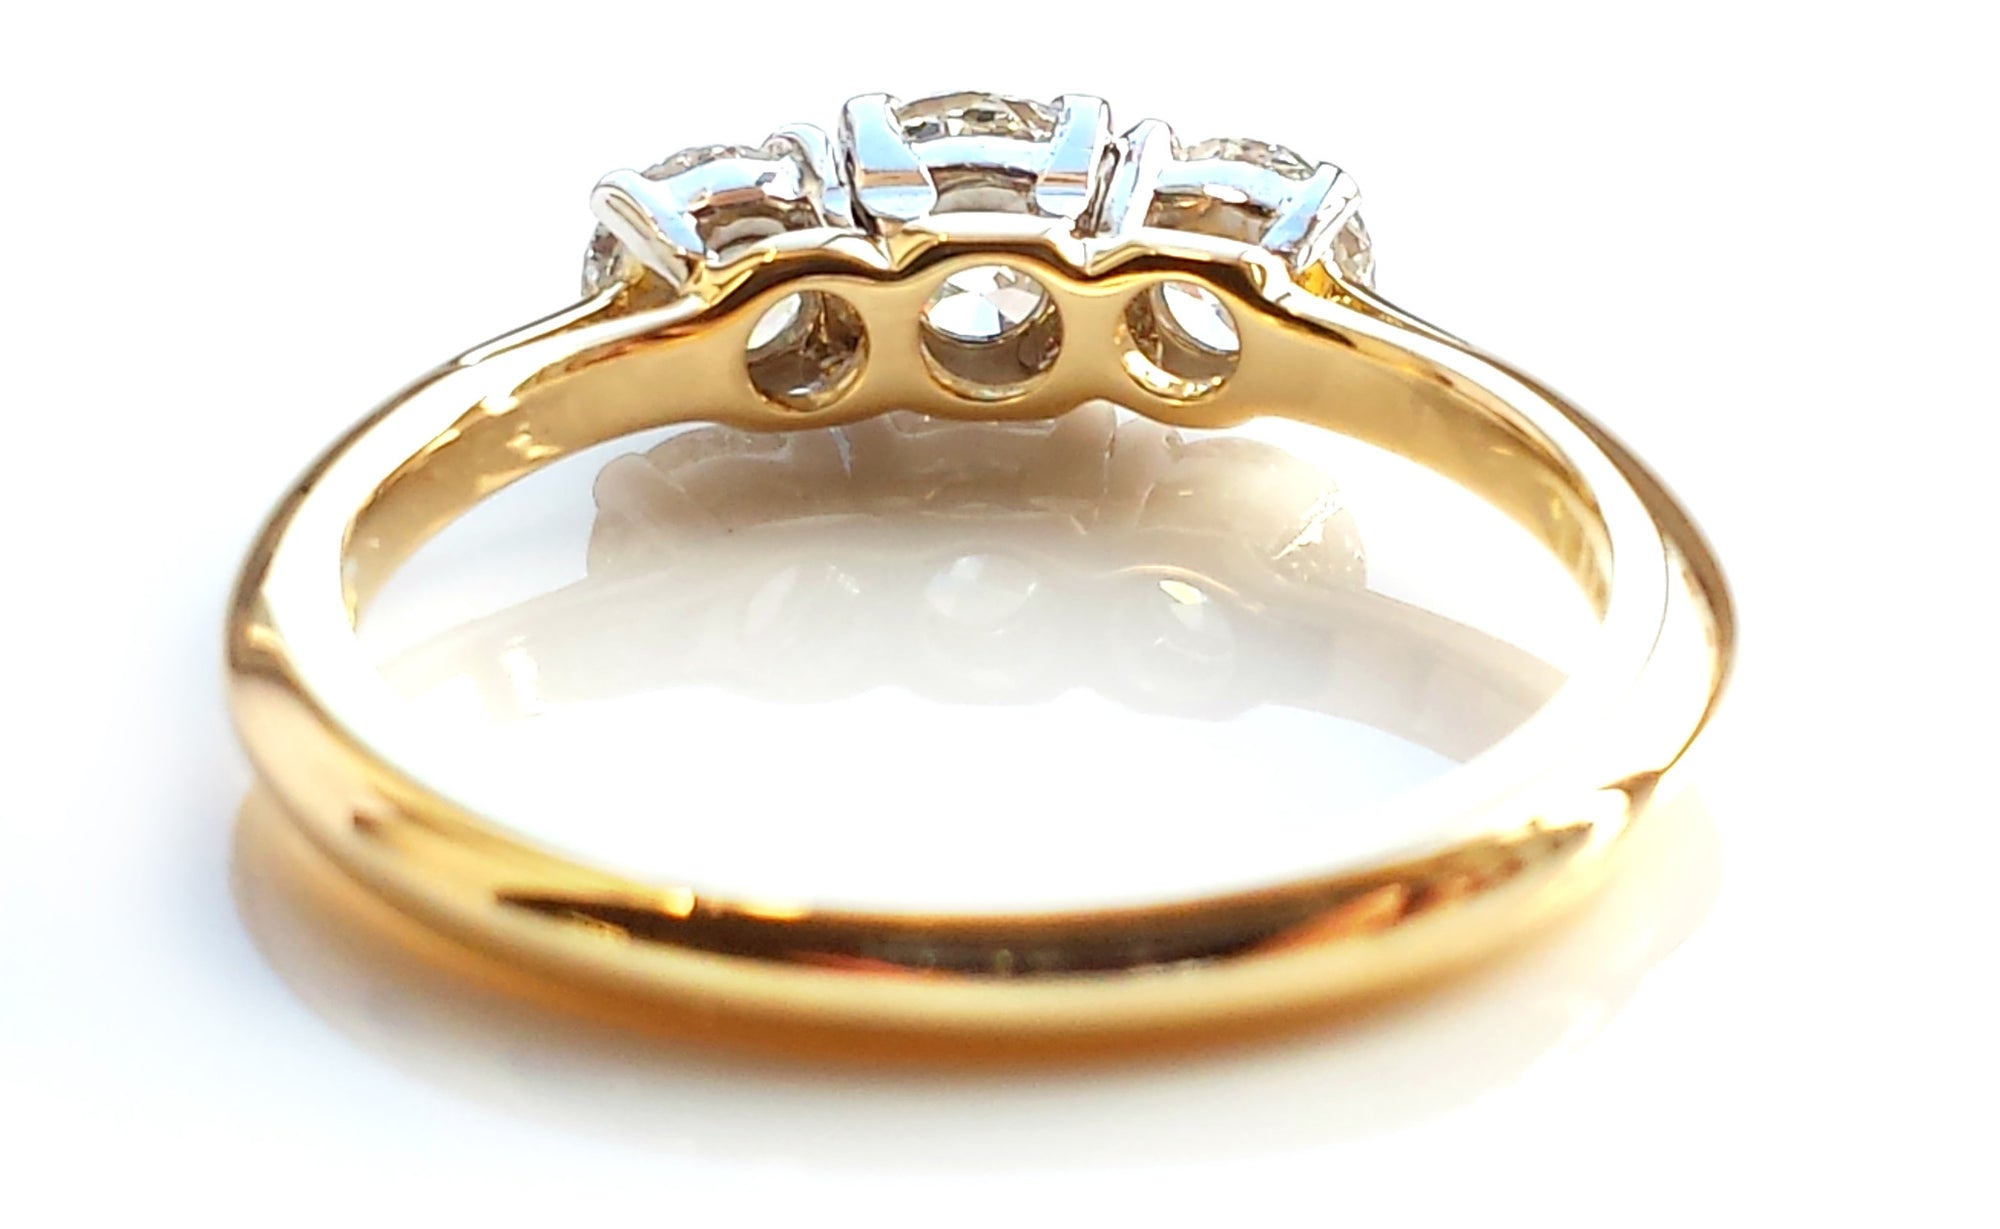 Vintage Tiffany & Co. 0.90ct 3-Stone Diamond Engagement Ring in 18K Gold